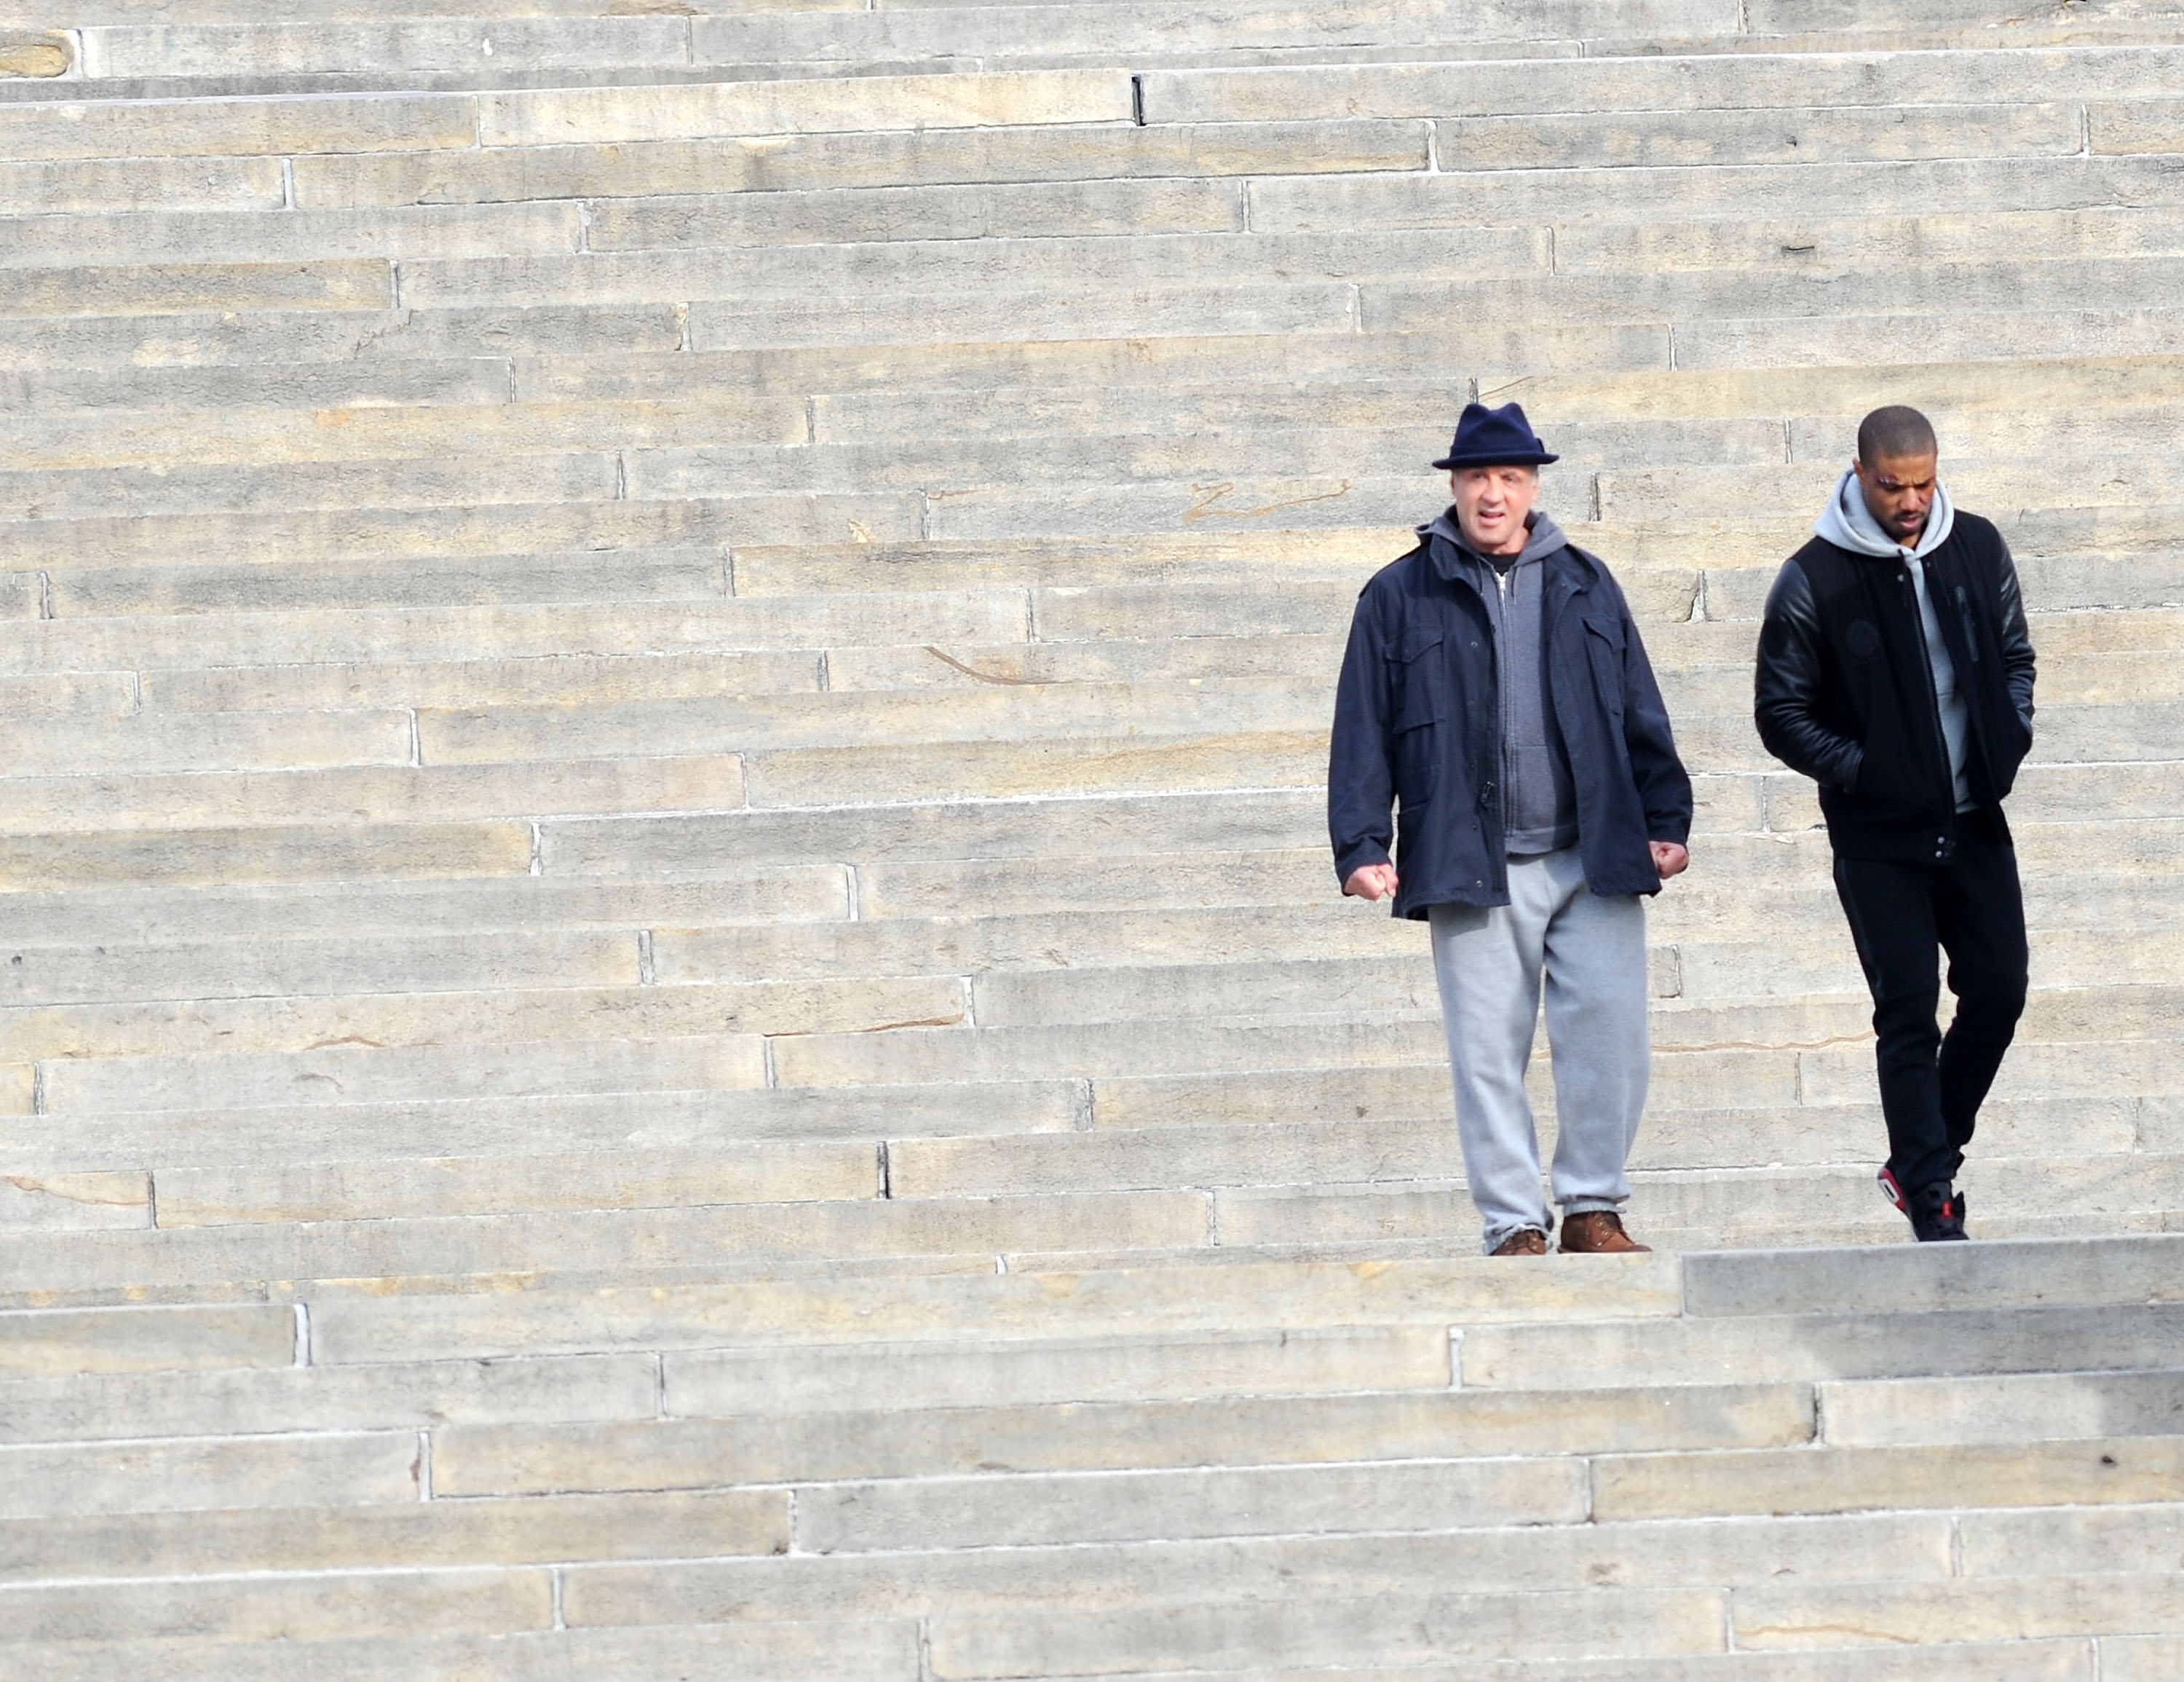 Sylvester Stallone and Michael B. Jordan on the set of "Creed" at the "Rocky Steps" at the Philadelphia Museum of Art